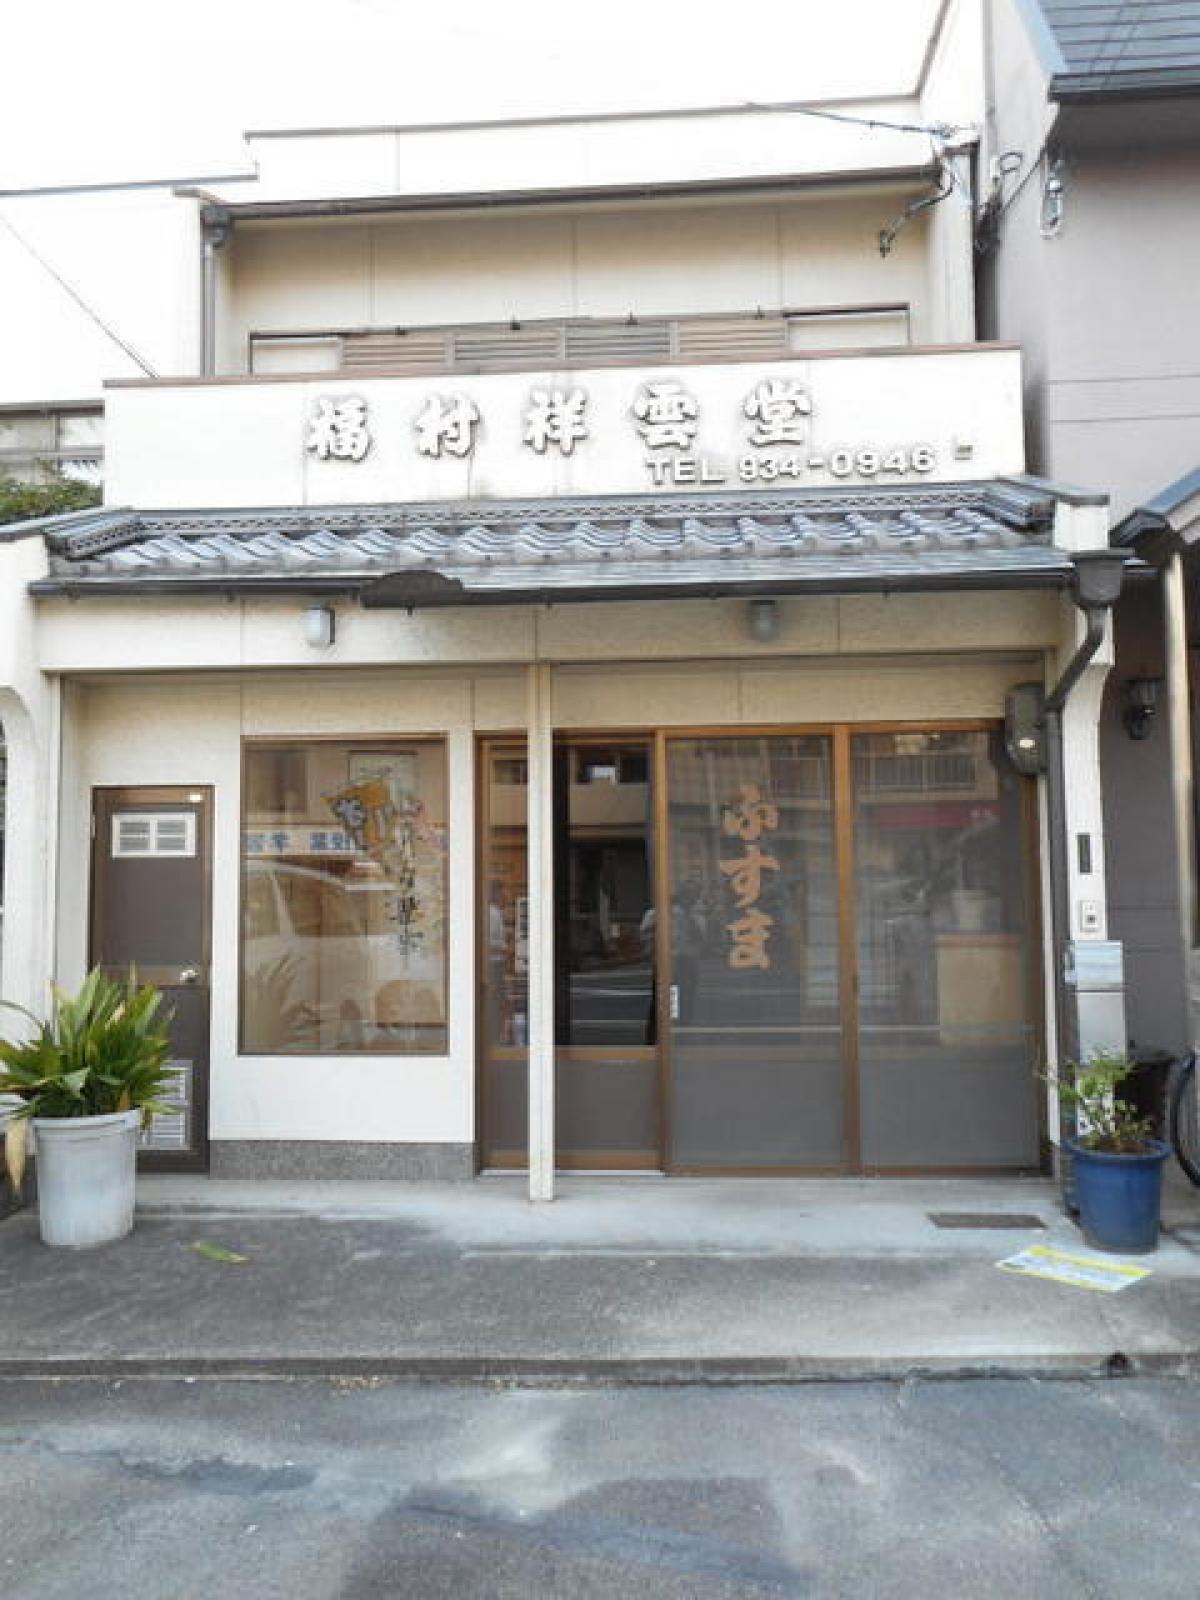 Picture of Home For Sale in Muko Shi, Kyoto, Japan